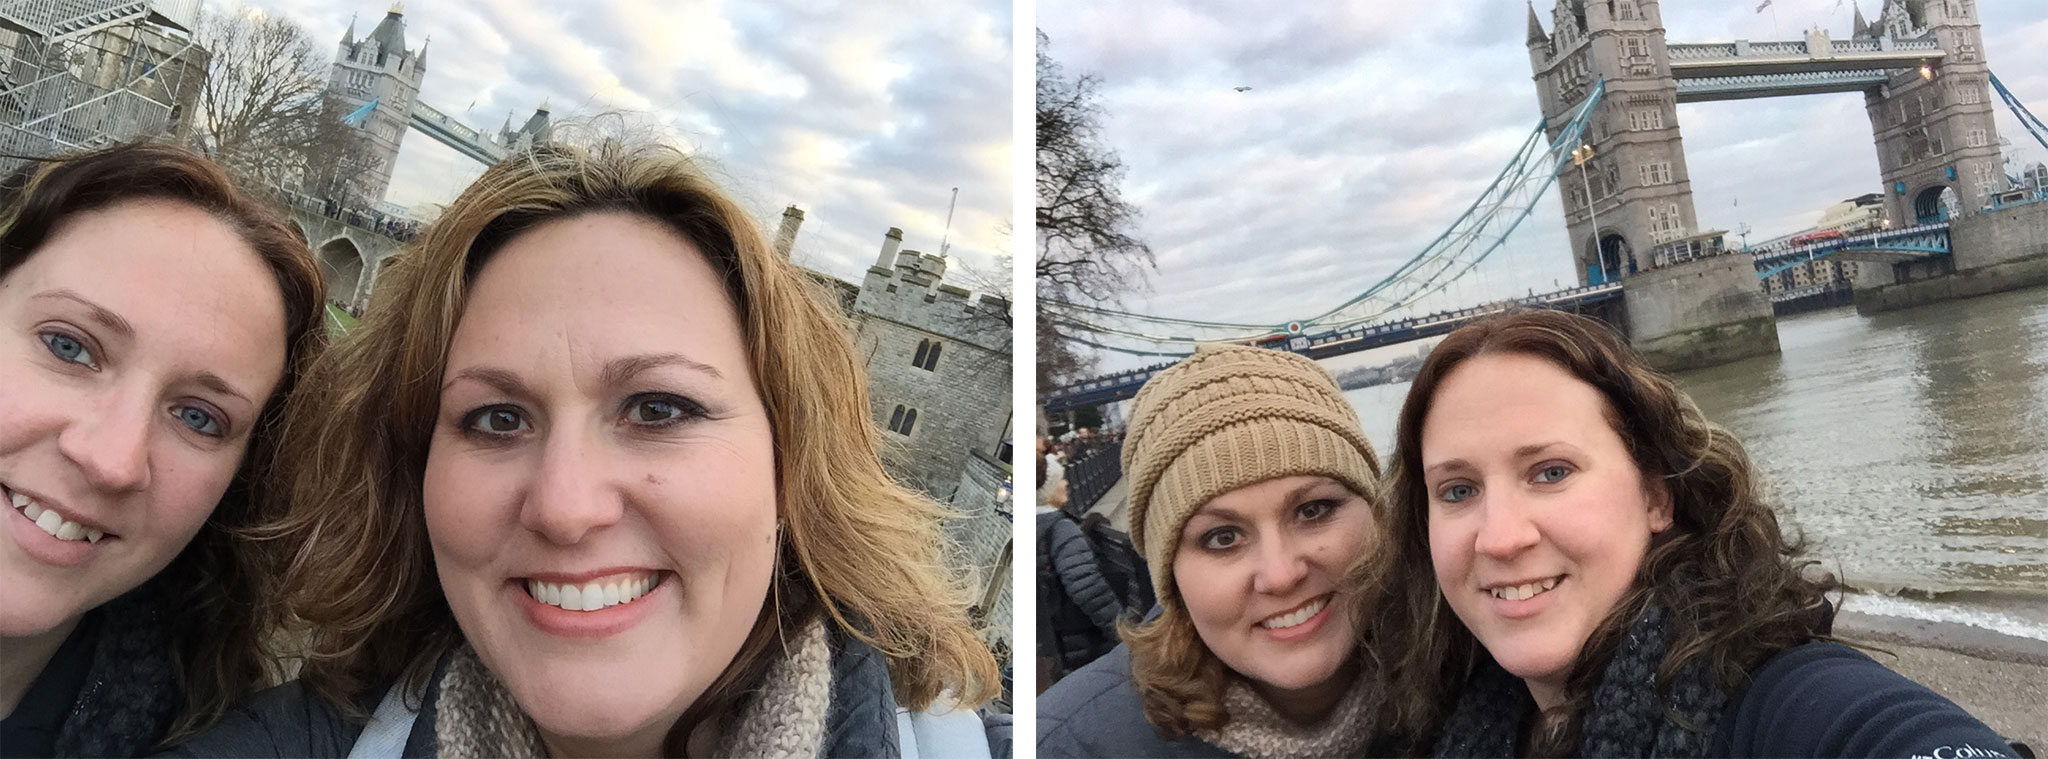 How I learned to love the selfie stick